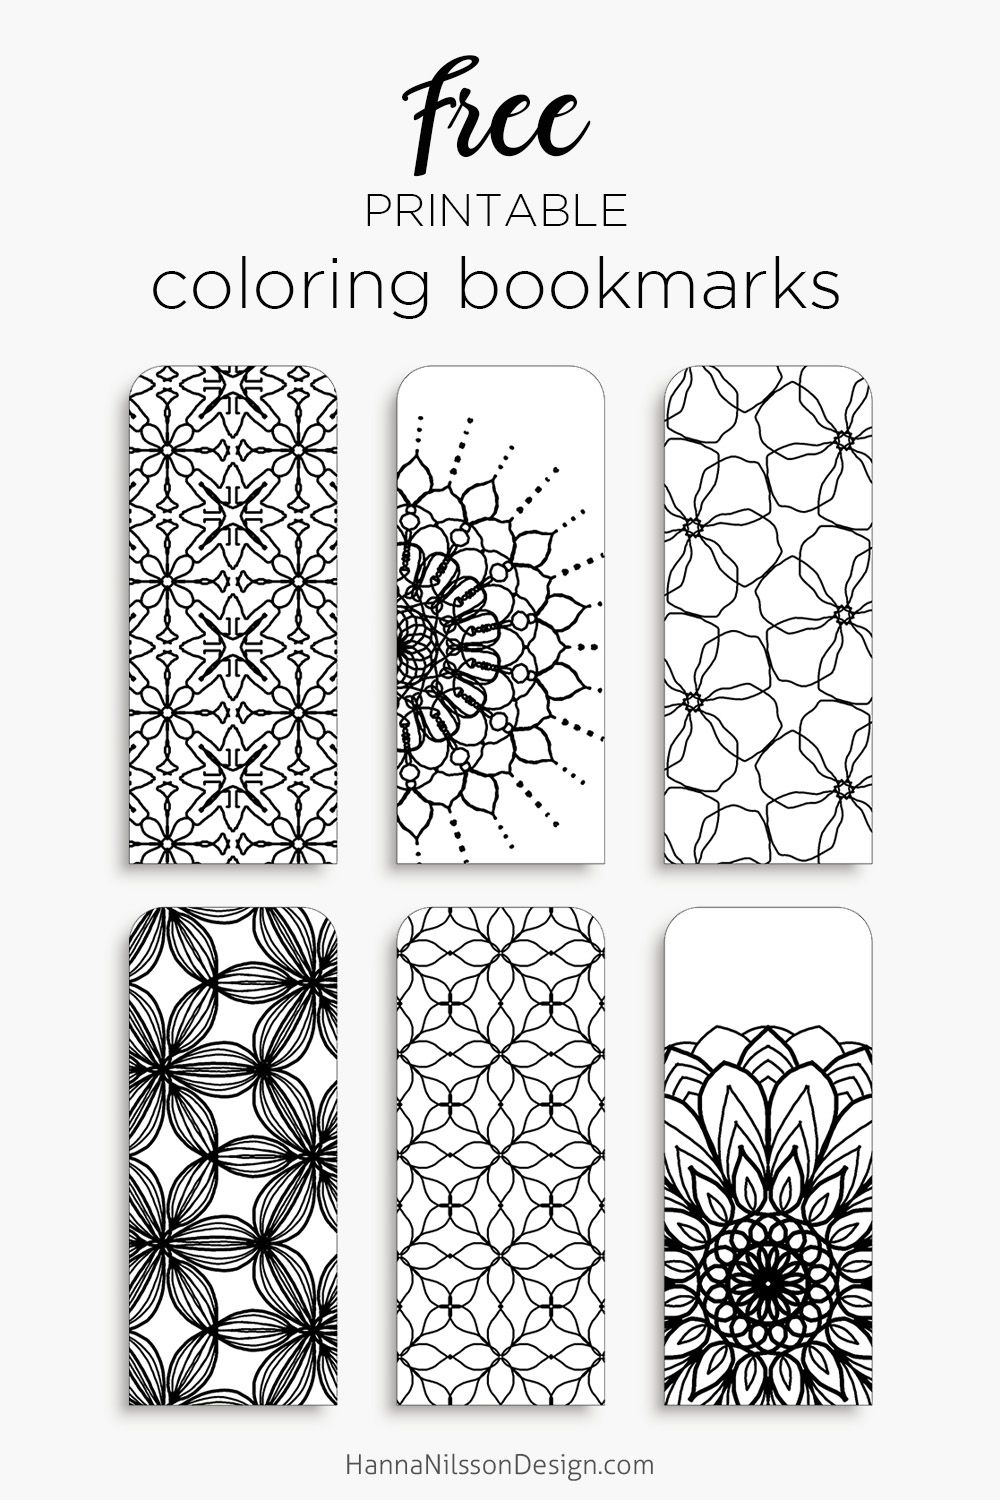 Coloring Bookmarks – Print, Color And Read | Hanna Nilsson Design - Free Printable Bookmarks